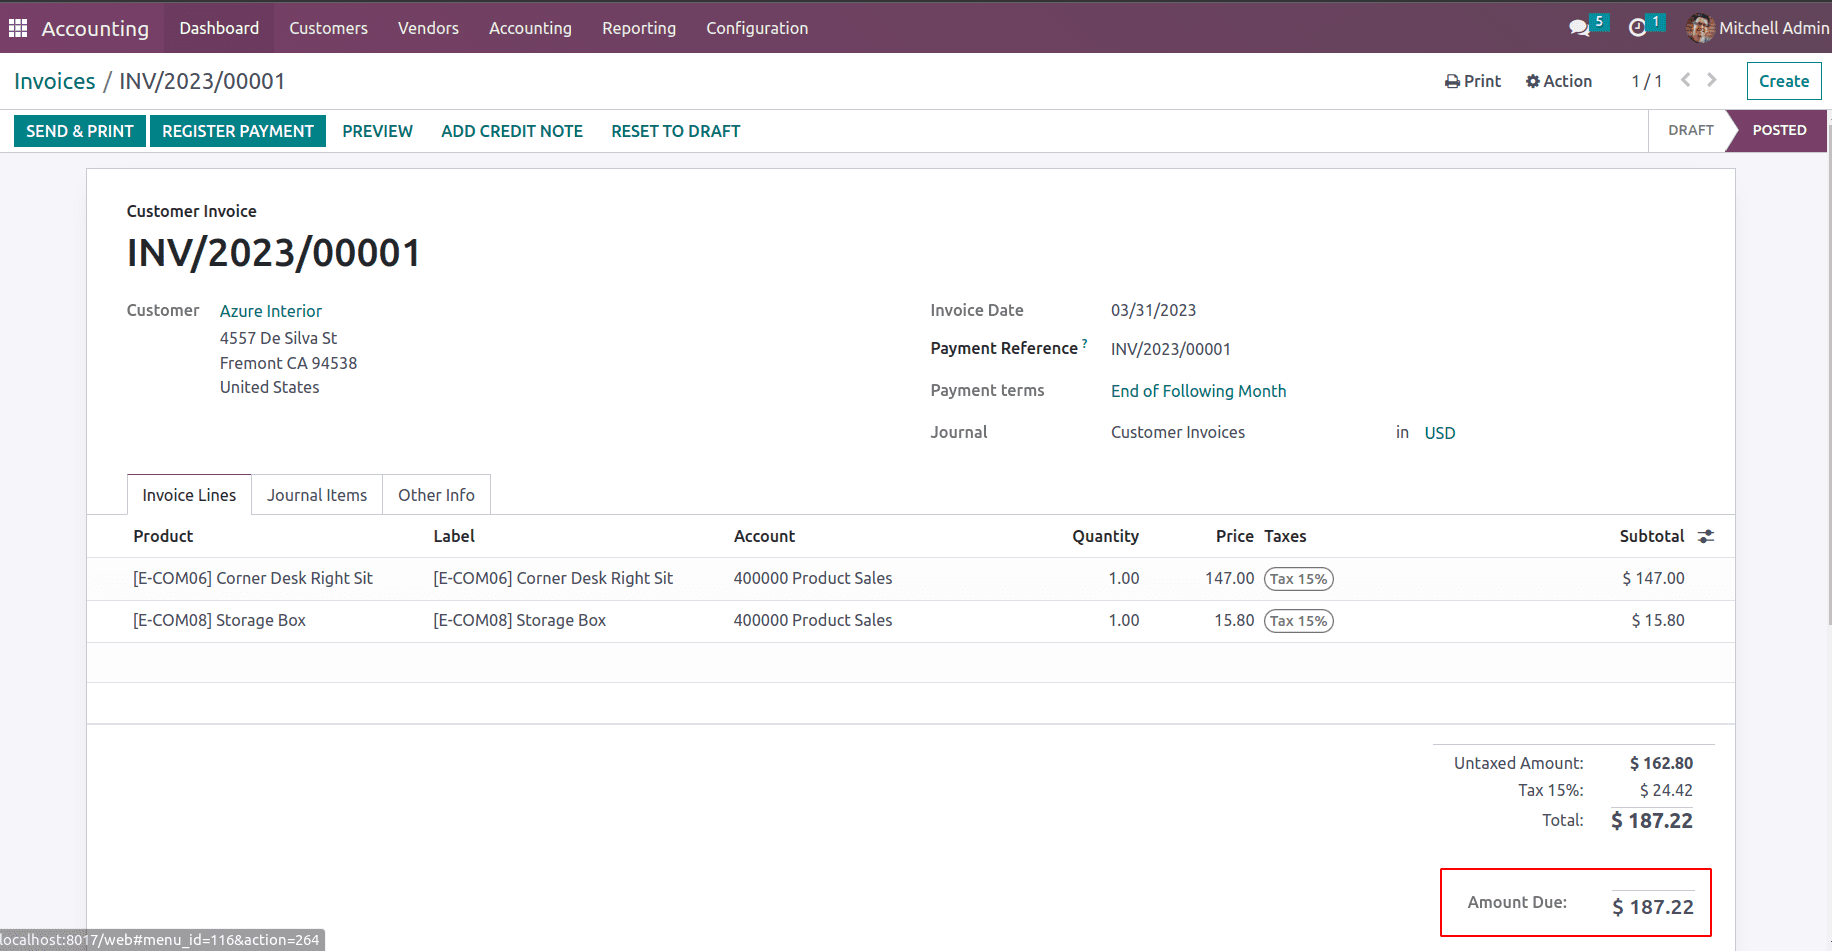 Balance Sheet Features in Odoo 16